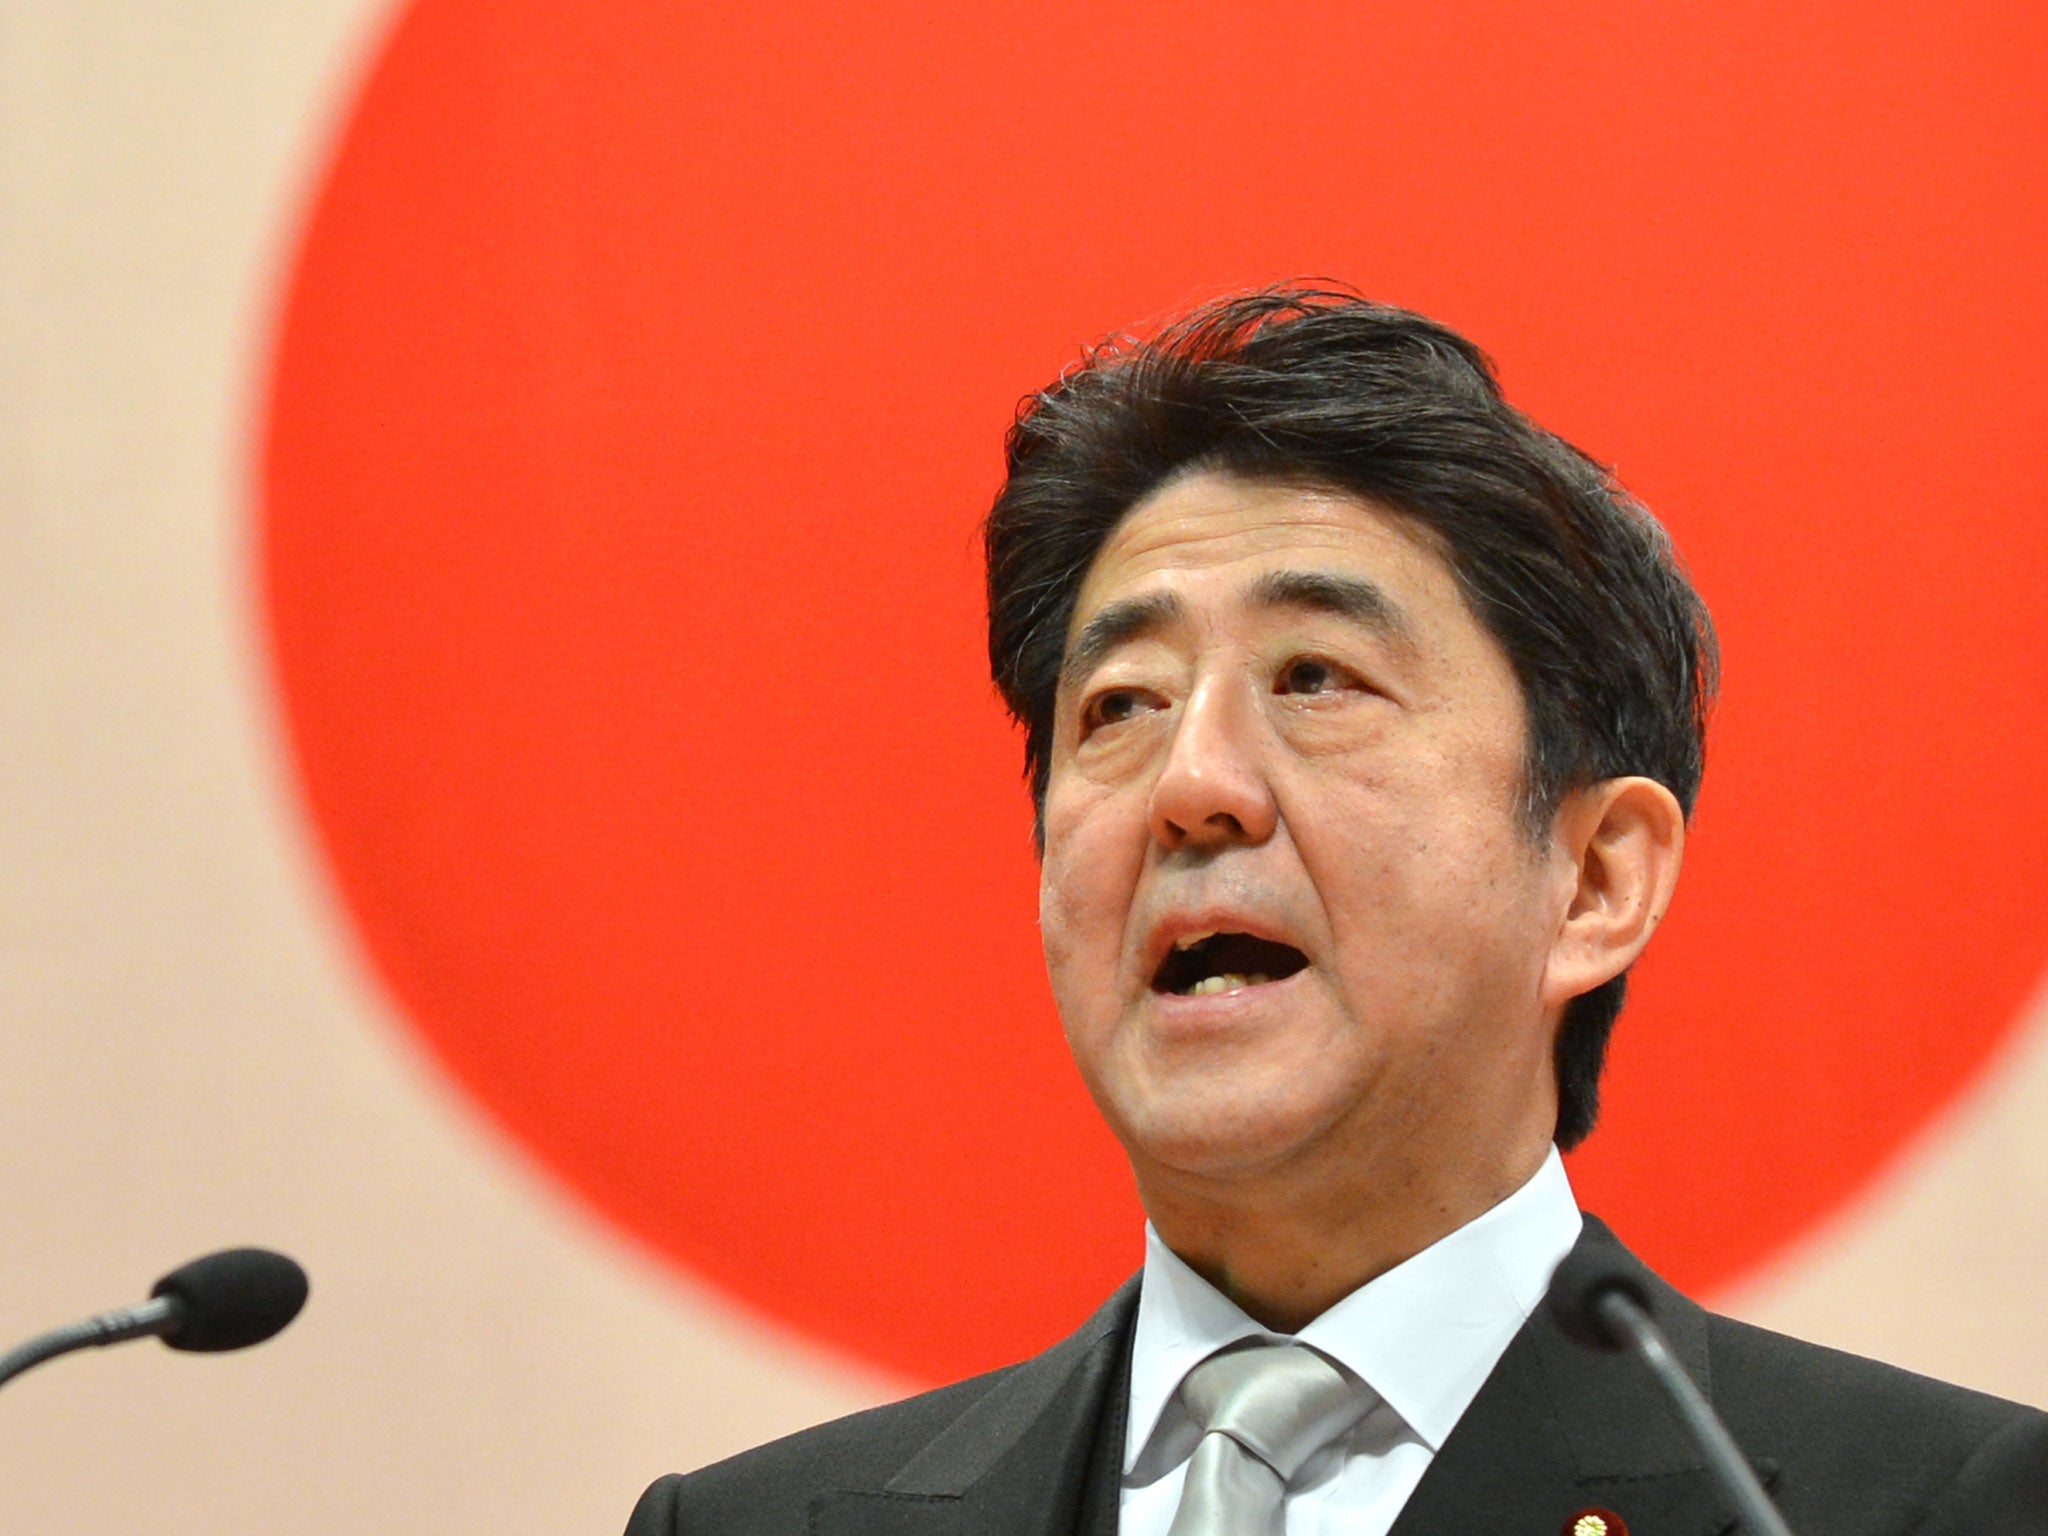 Japanese Prime Minister Shinzo Abe delivers a speech during a graduation ceremony at the National Defense Academy in Yokosuka, Kanagawa Prefecture on March 17, 2013.